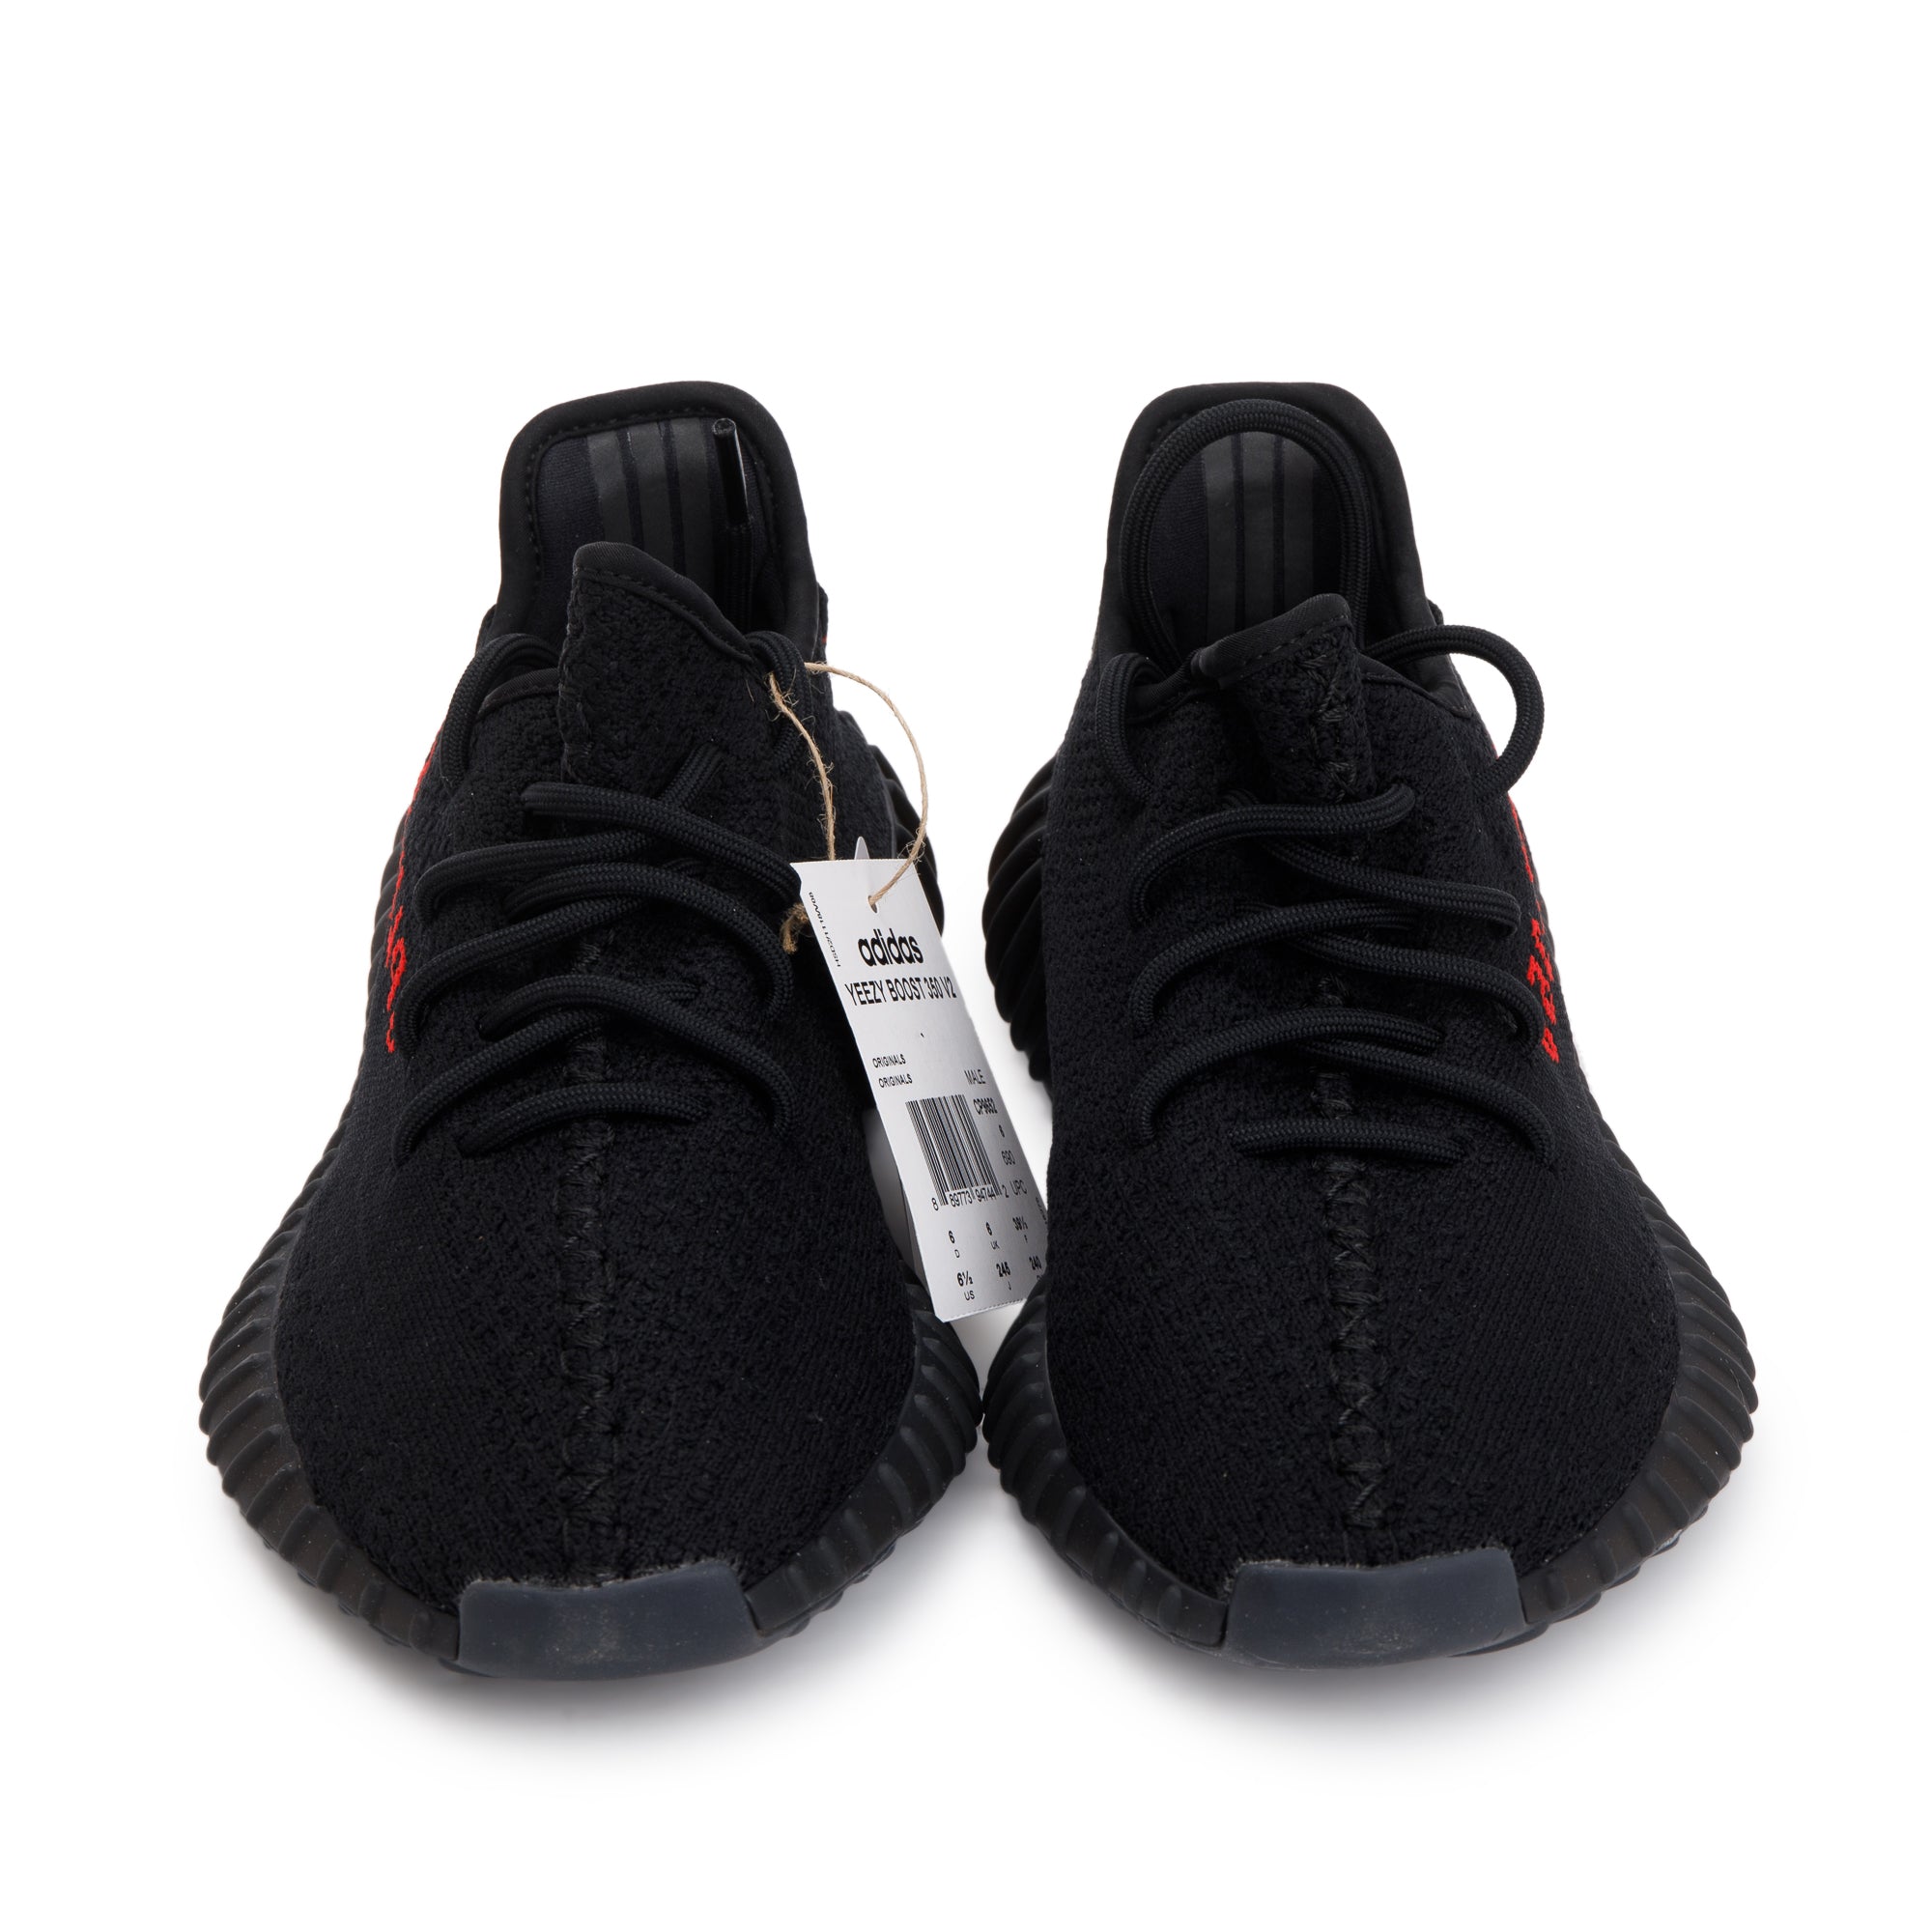 Adidas Yeezy Boost 350 V2 Black Sneakers, Size 6.5 w/ Box – Oliver ...